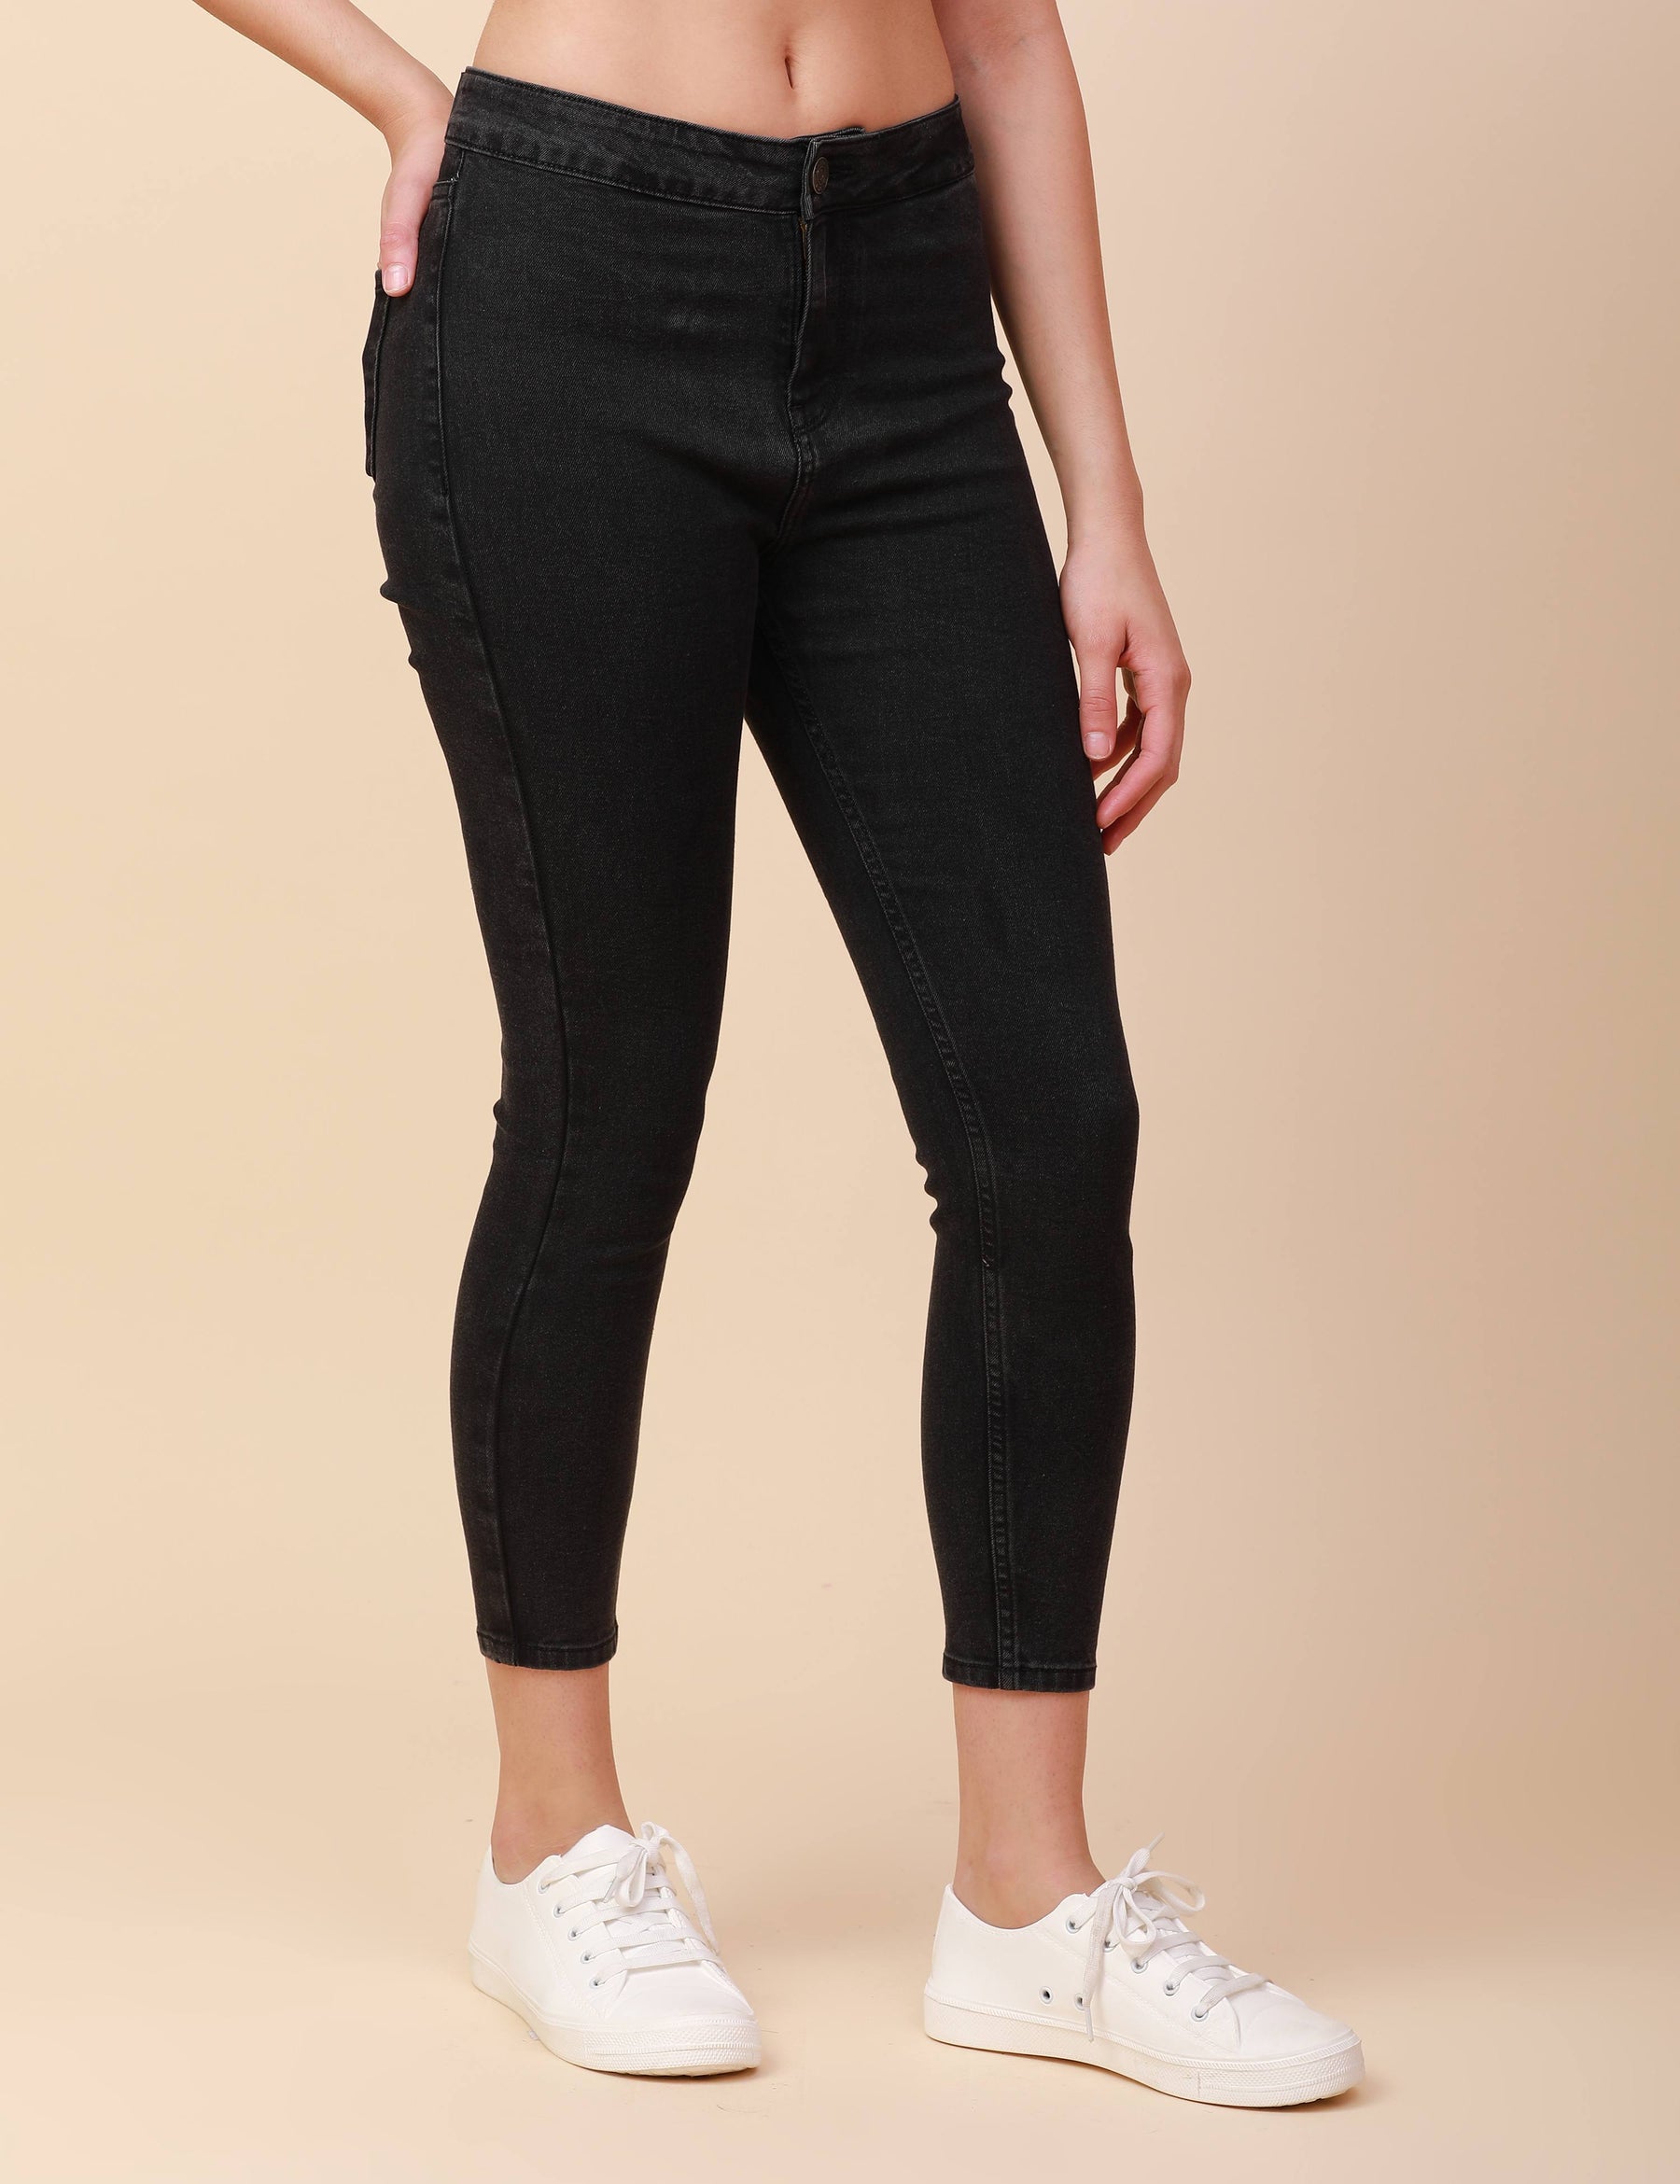 Skinny Charcoal Black High Waist Jeans Ankle Fit